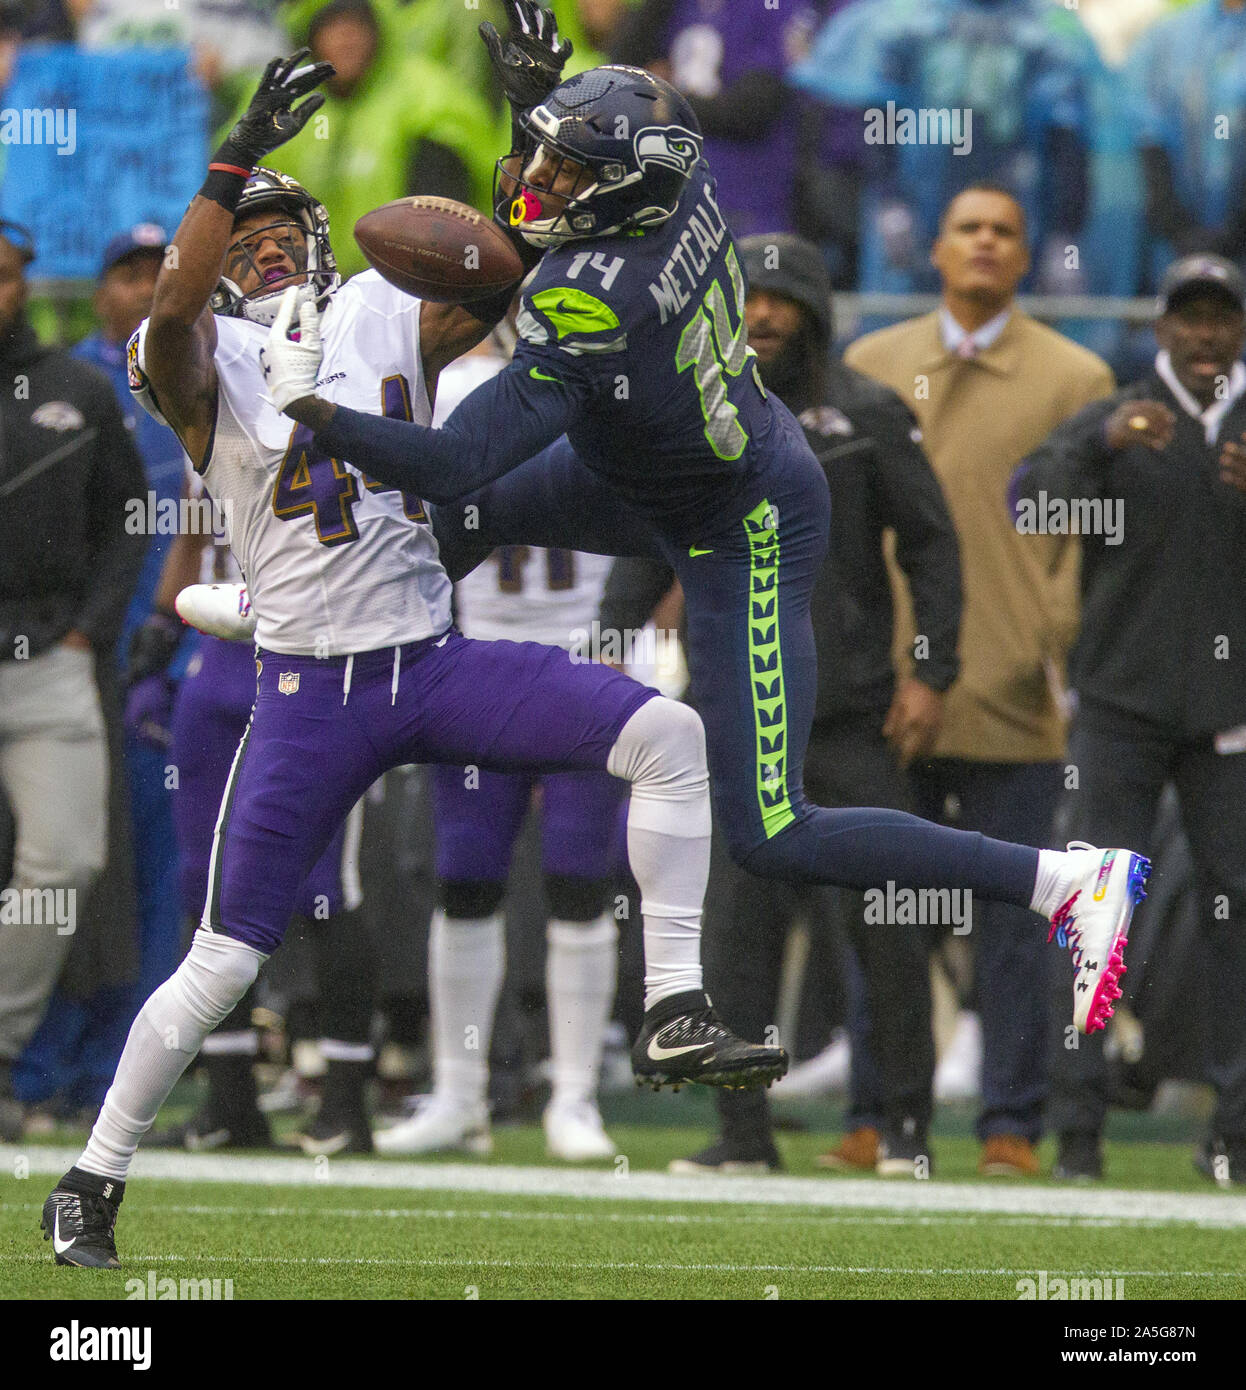 Seattle, United States. 20th Oct, 2019. Baltimore Ravens cornerback Marlon Humphrey (44) breaks up a pass intended for Seattle Seahawks wide receiver D.K. Metcalf (14) during the first quarter at CenturyLink Field on Sunday, October 20, 2019 in Seattle, Washington. Ravens and Seahawks tie13-13 at halftime in Seattle. Photo by Jim Bryant/UPI Credit: UPI/Alamy Live News Stock Photo